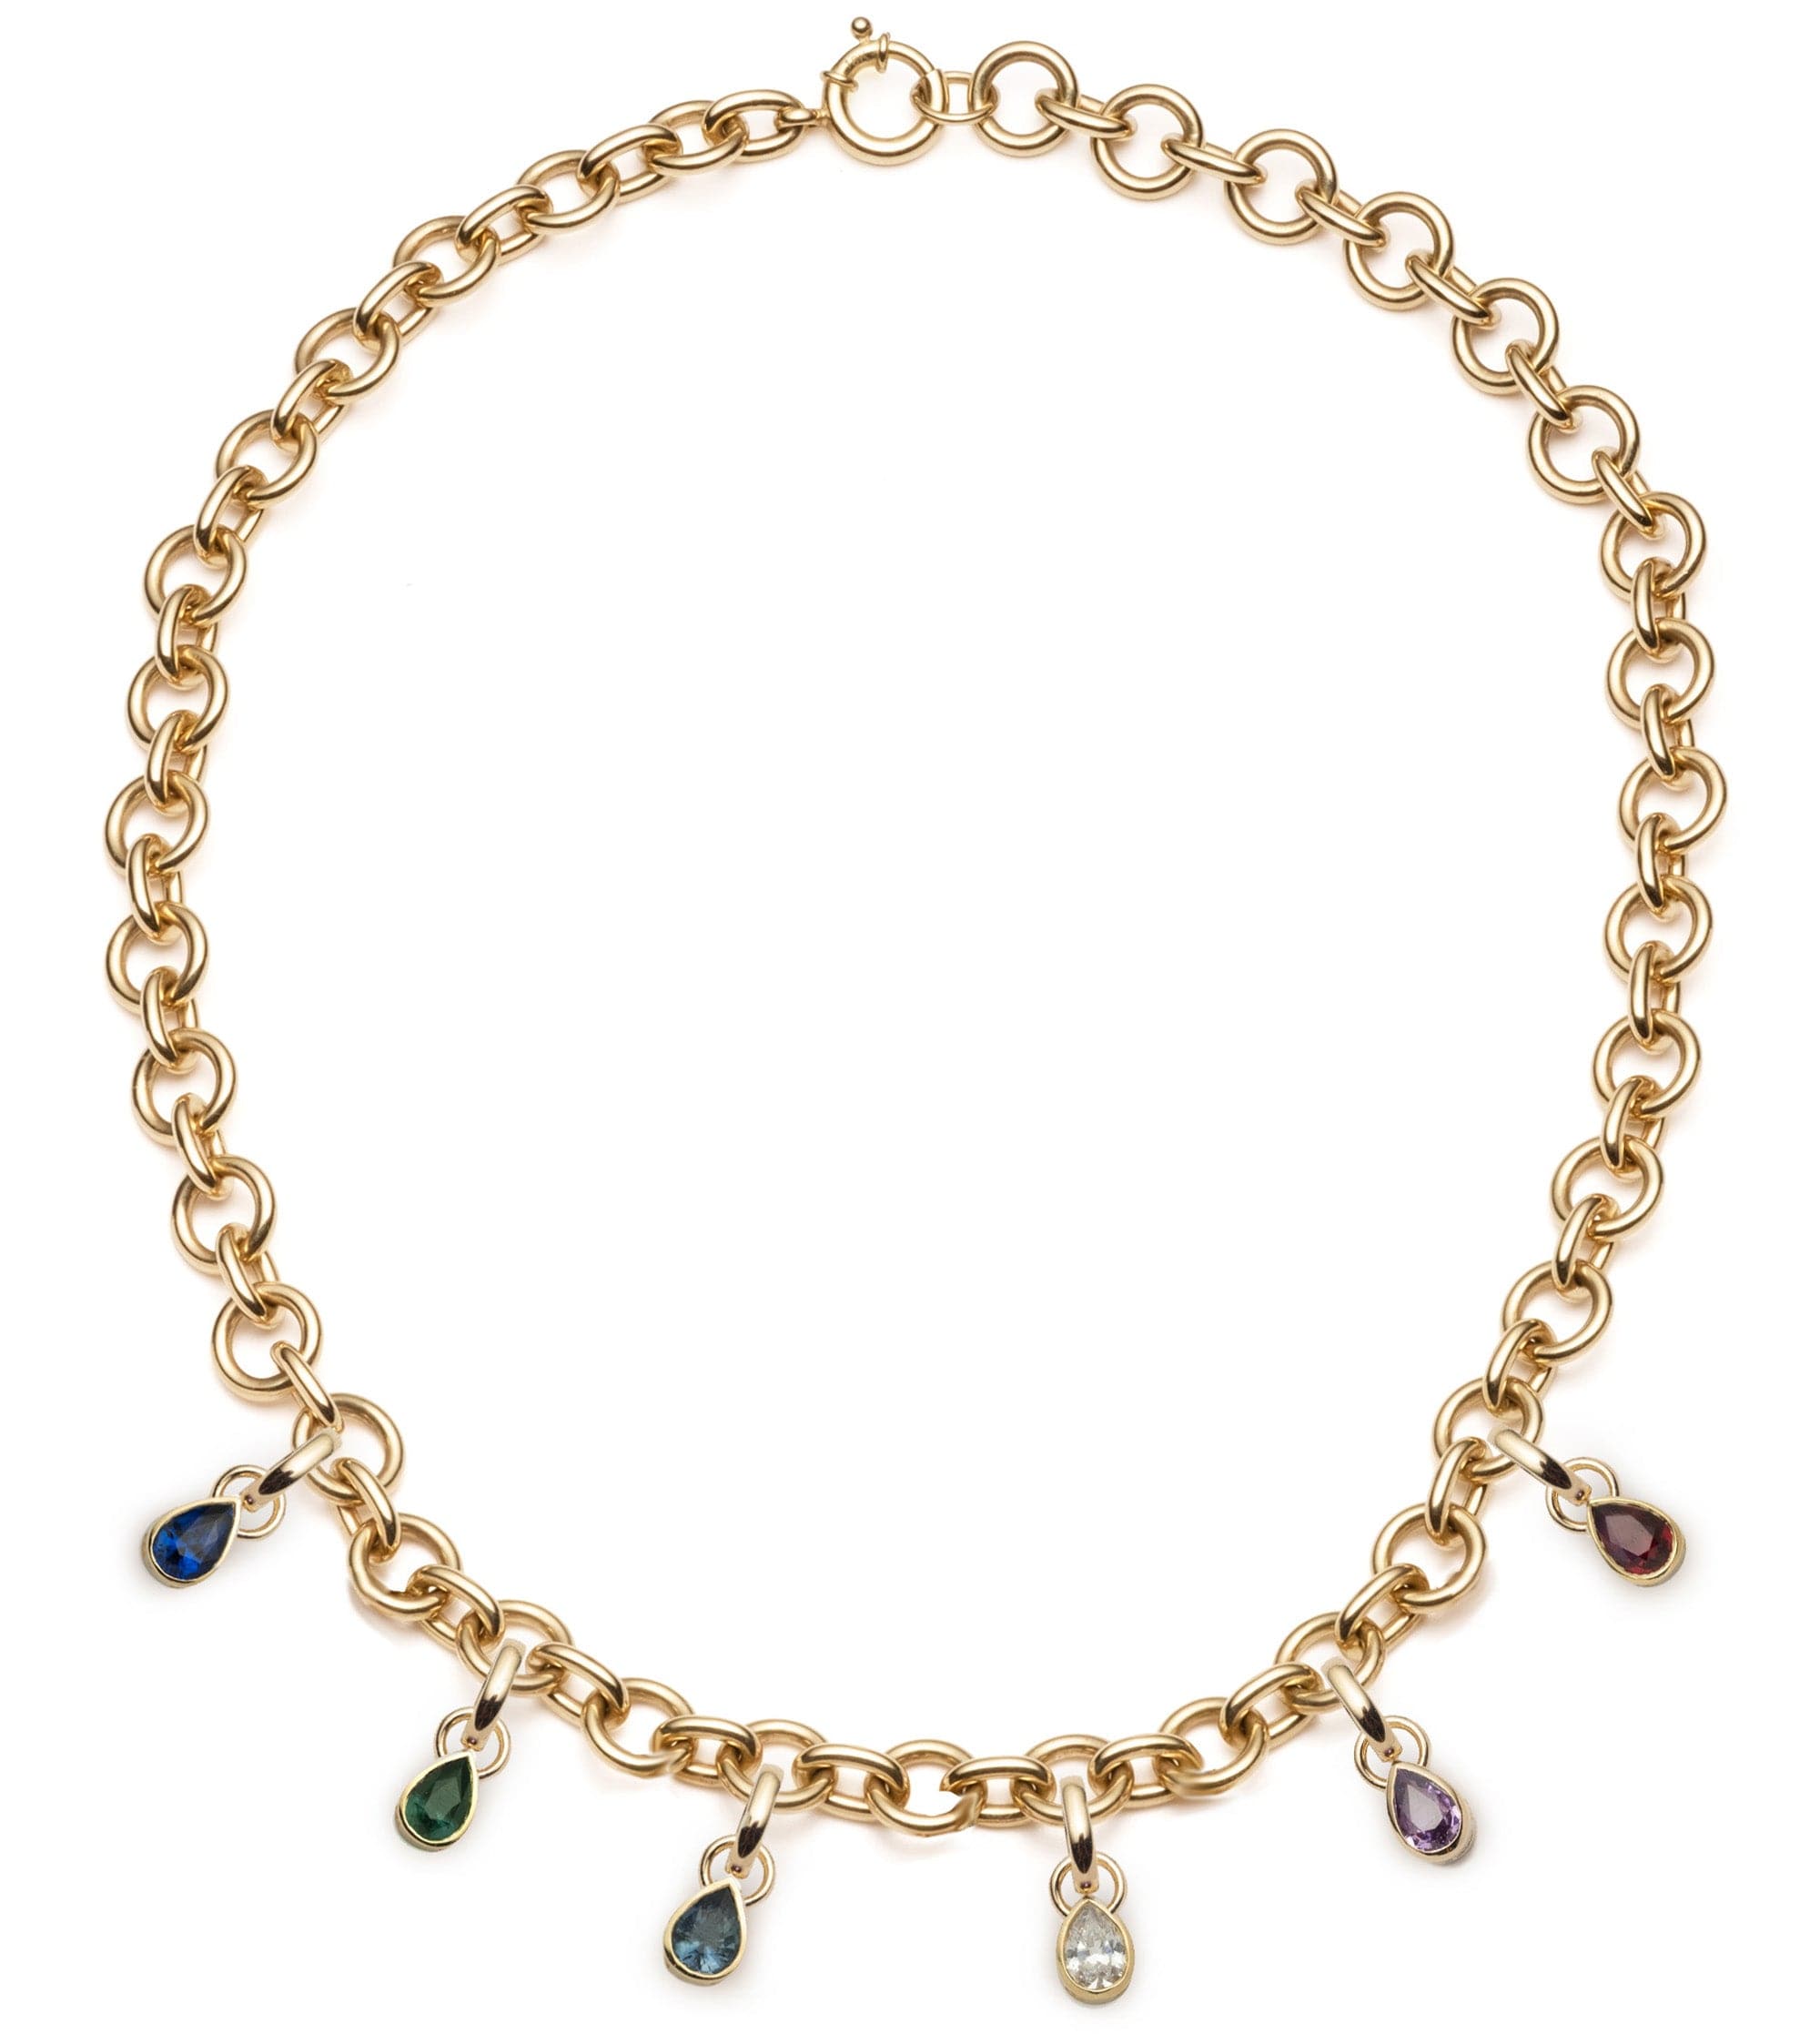 Forever & Always a Pair : Diamond, Emerald, Ruby, and Sapphire Midsized Mixed Link Chain Necklace